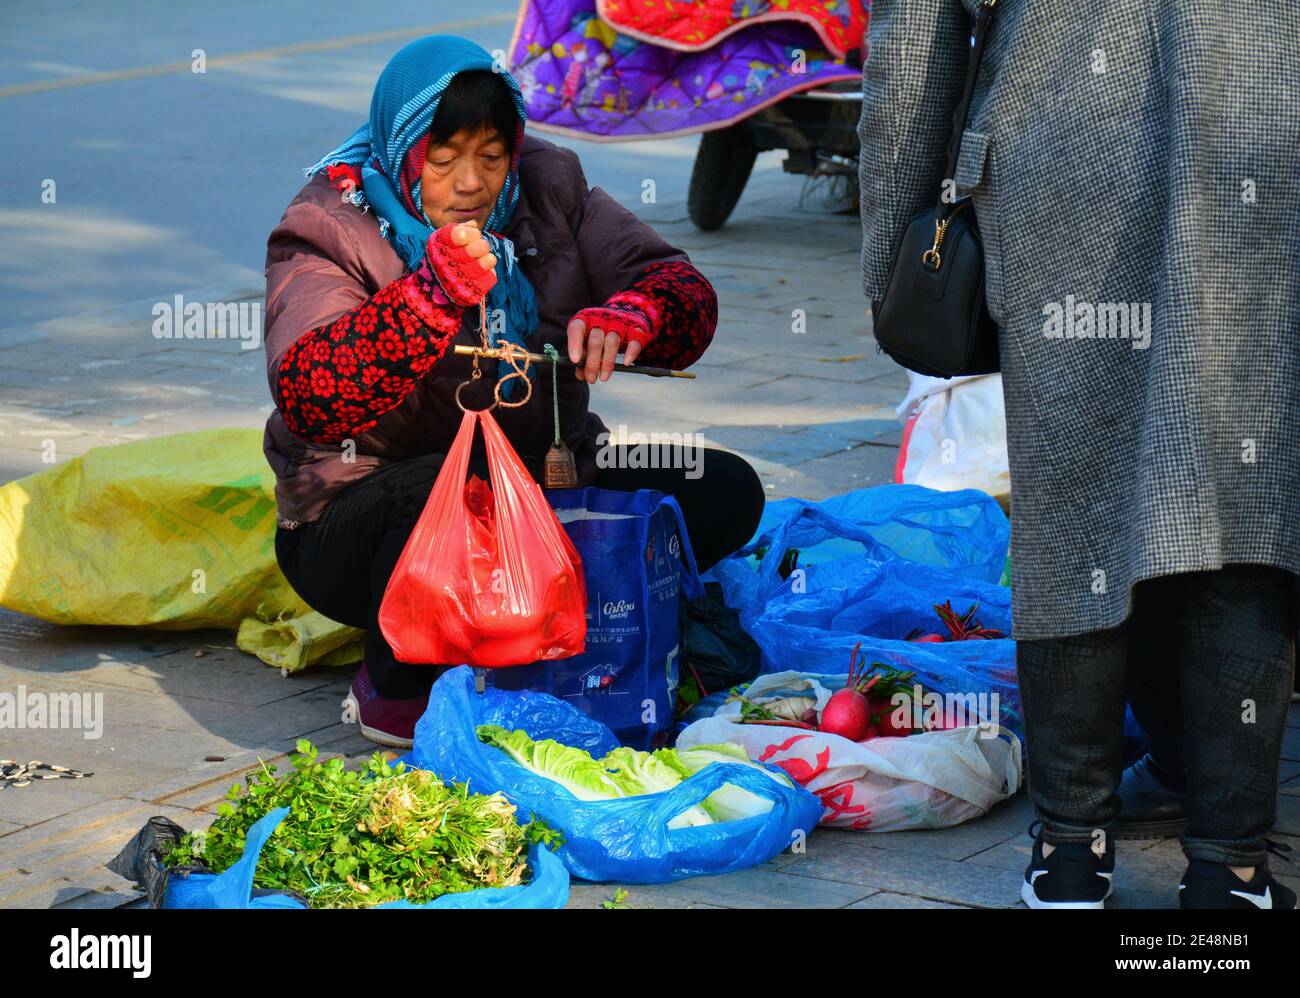 Lady selling fruit and vegetables on the street, using very old fashioned scales to weigh the items. Stock Photo